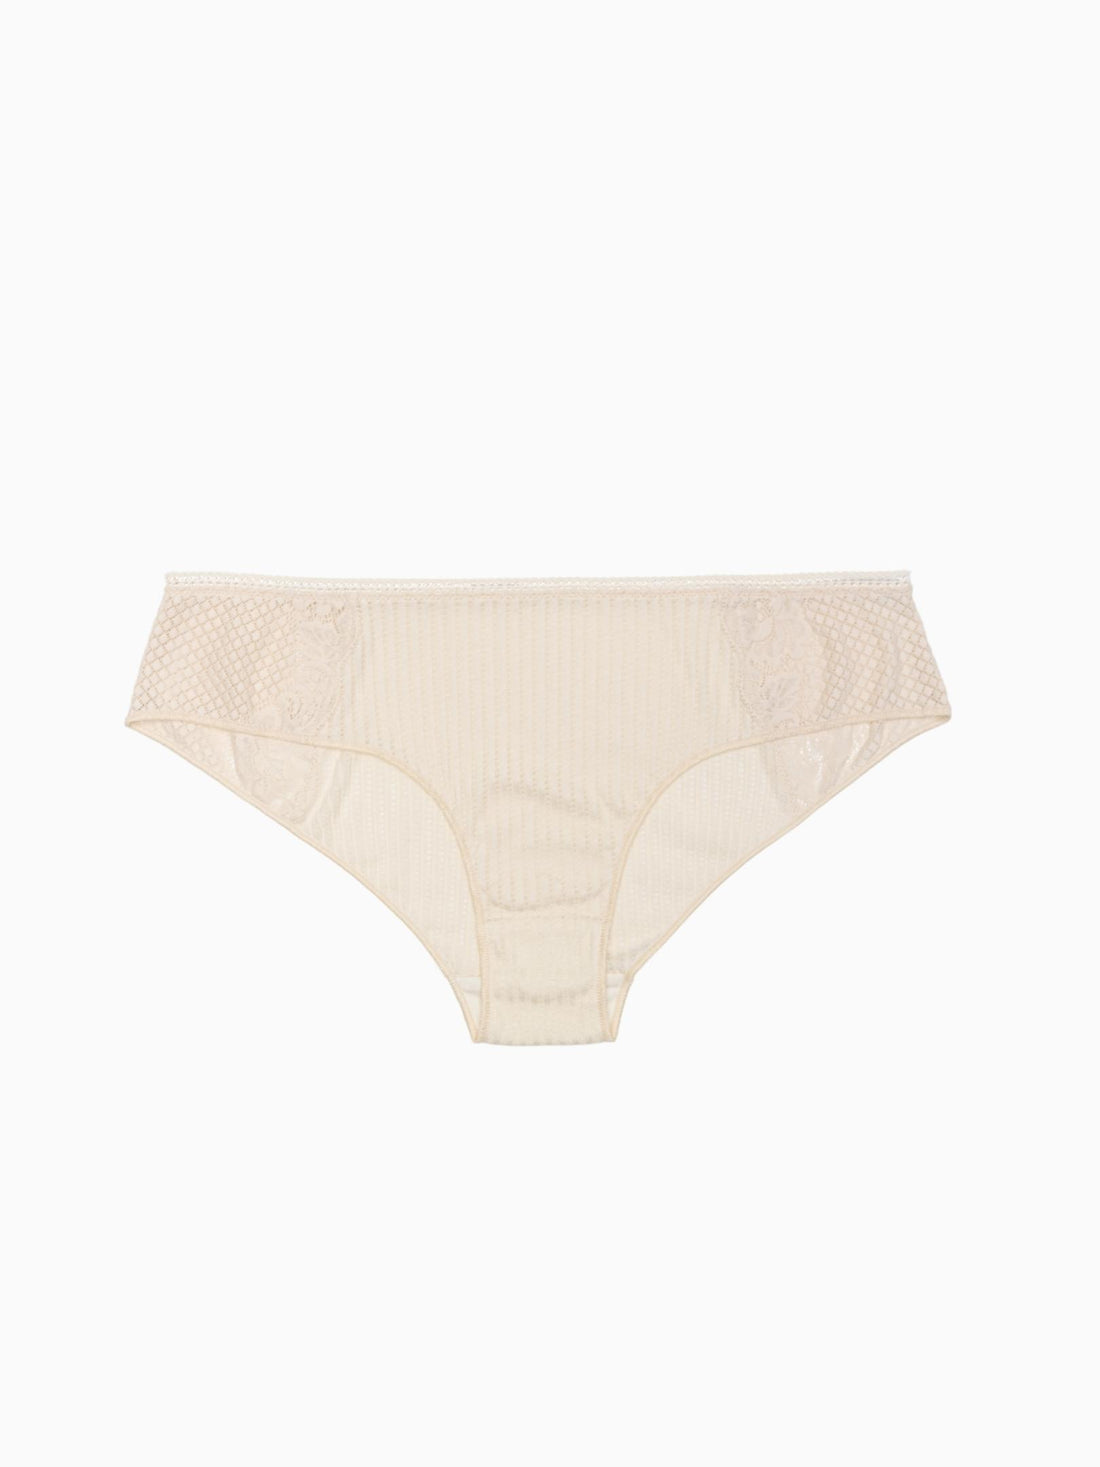 Thong Four Pack - Magic  Sustainable TENCEL™ Lace Underwear